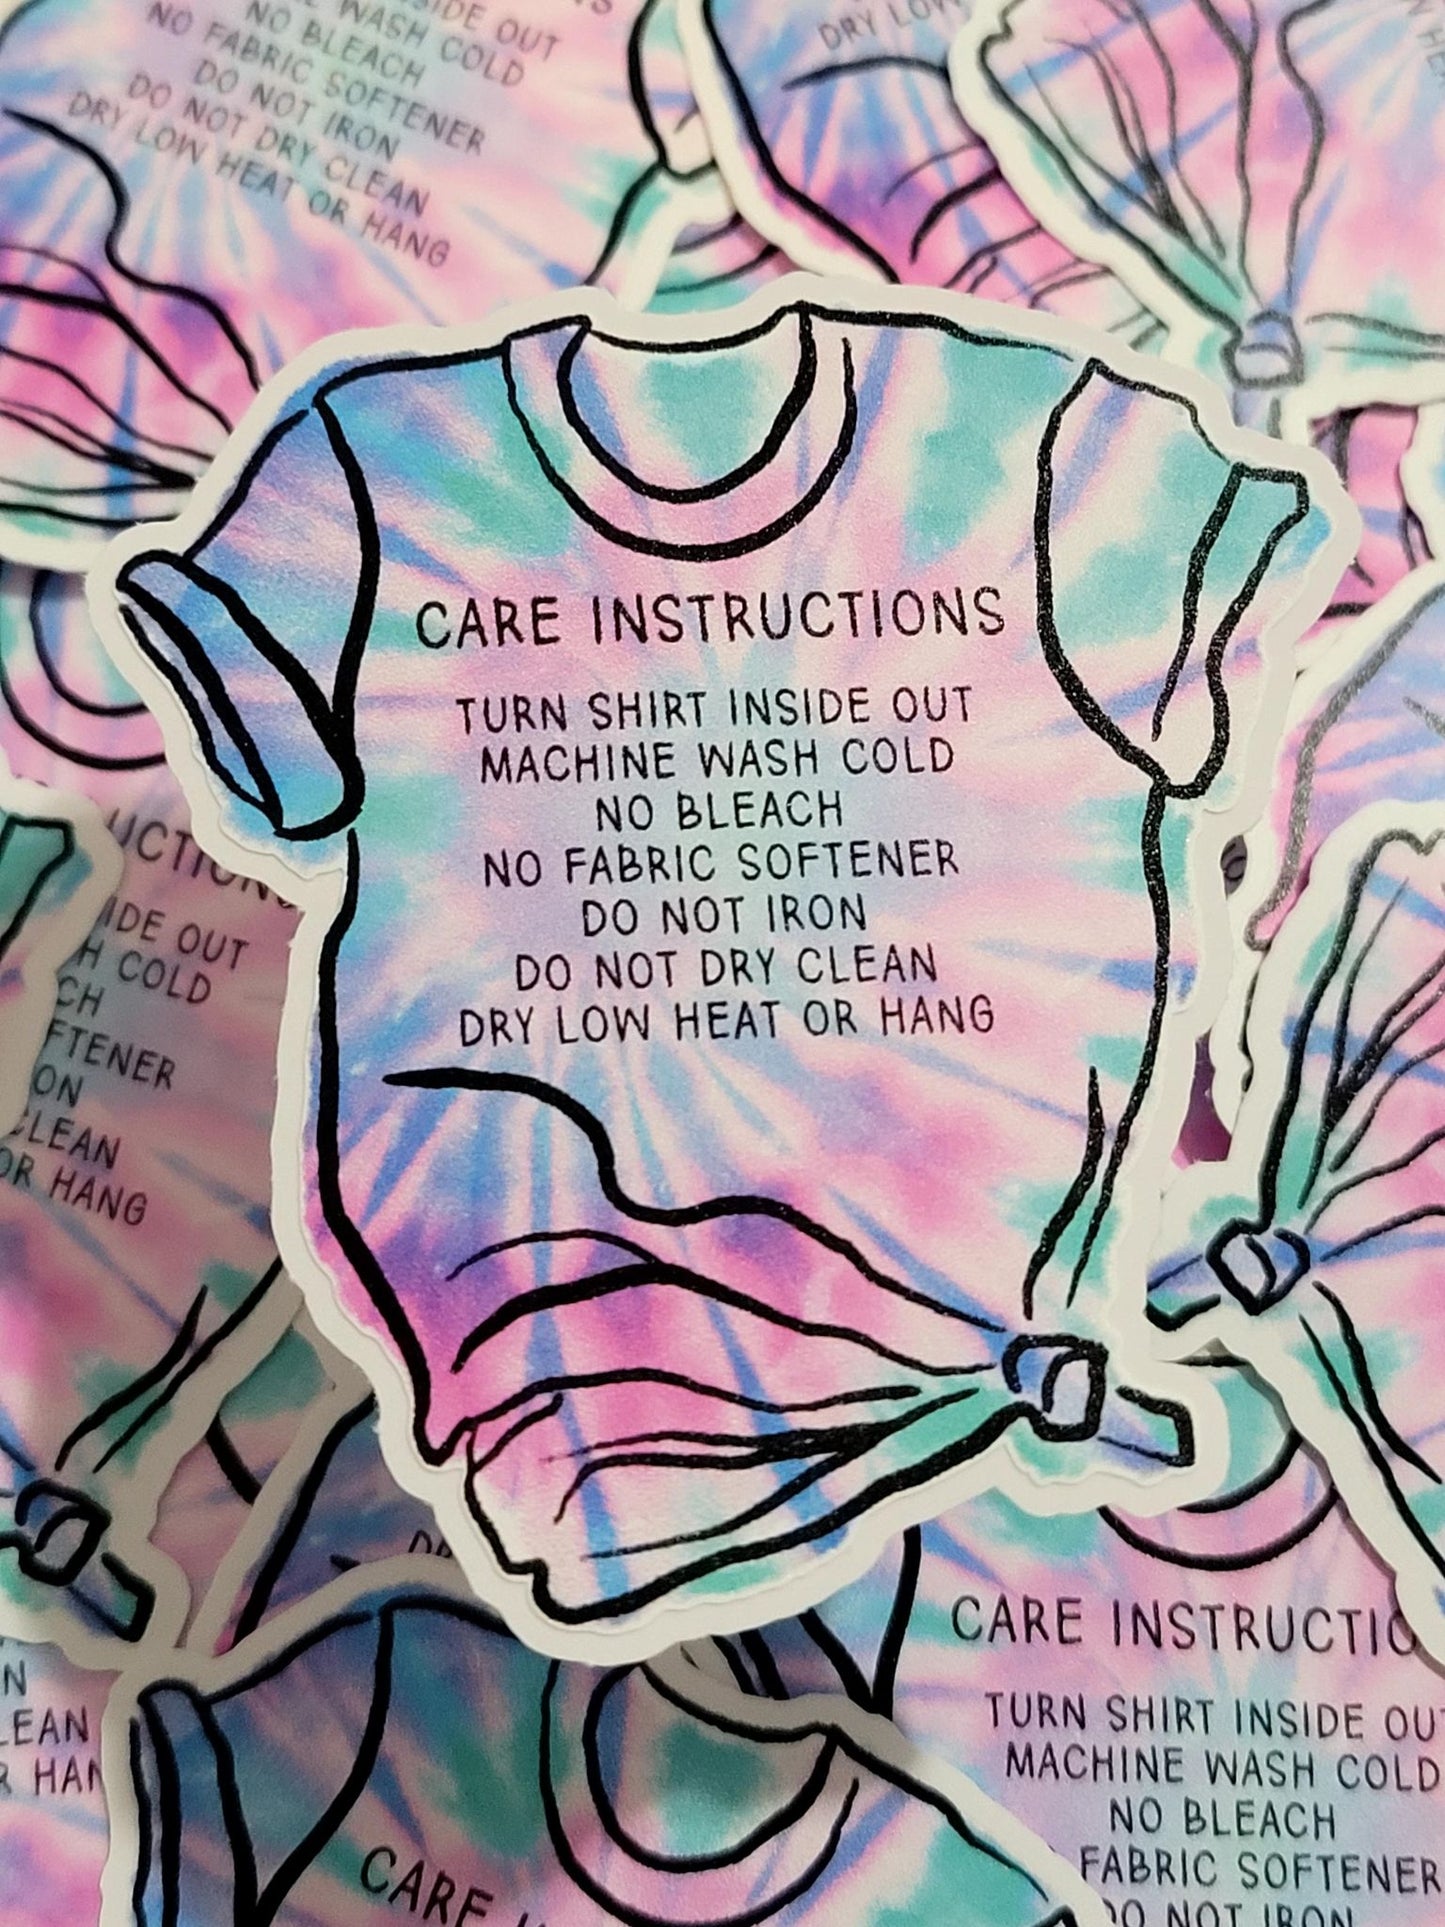 T-shirt care instructions Die cut sticker 3-5 Business Day TAT